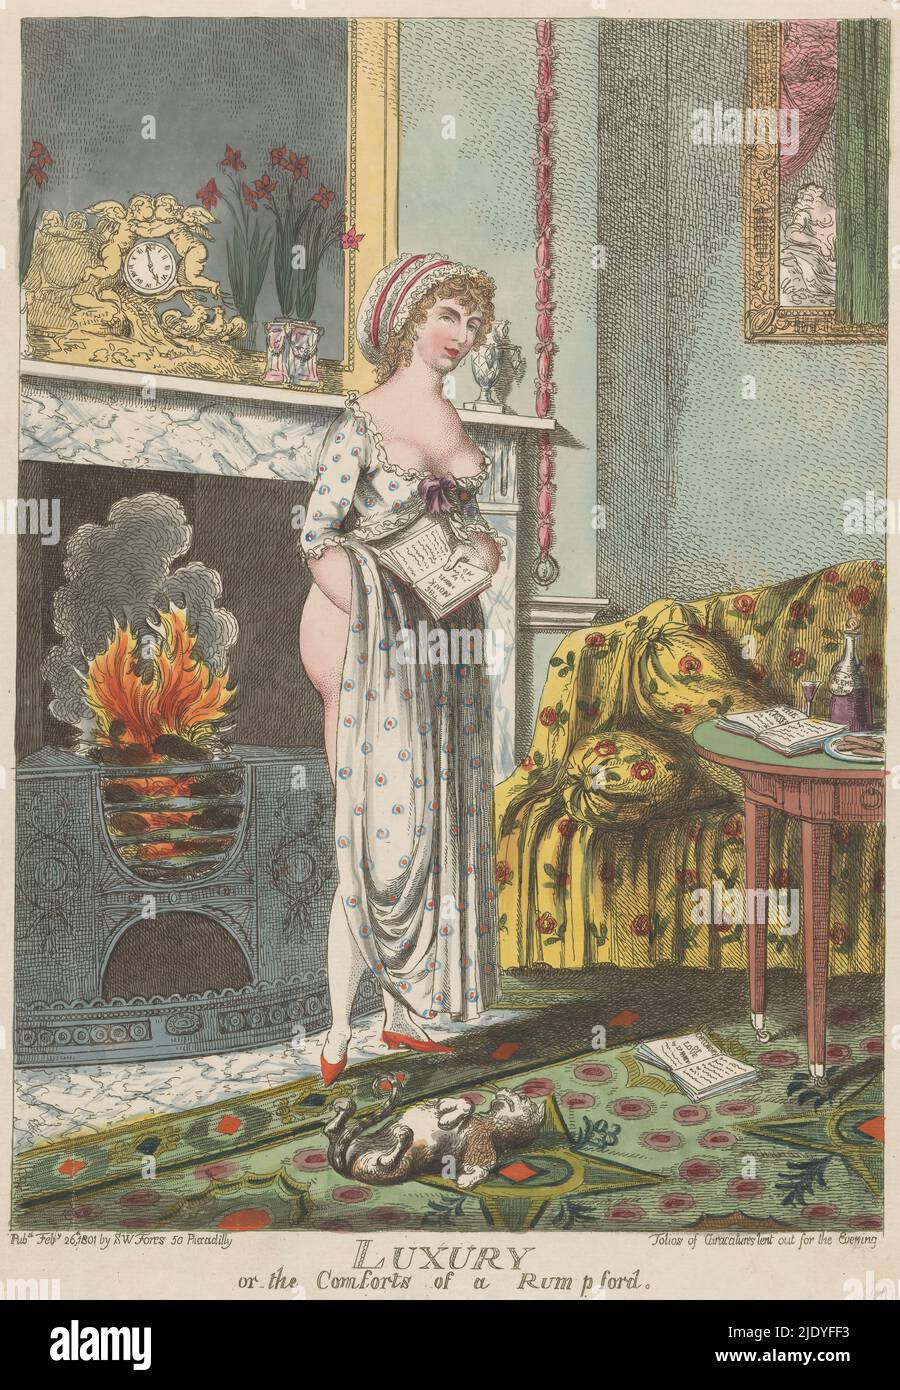 Woman warming herself by the fireplace, a book in her hand, Luxury or the Comforts of a Rumpford (title on object), Interior showing a young woman warming herself by the fireplace, her undergarments partially lifted revealing her buttocks. In her left hand she holds the 'Gothic Novel' The Monk, written by Matthew Gregory Lewis. In the interior, several references to love can be found, such as the painting with Danaë on the wall, the pendulum with putti and two open books titled: The Kisses and Oeconomy of Love., print maker: Charles Williams, publisher: Samuel W. Fores, (mentioned on object), Stock Photo